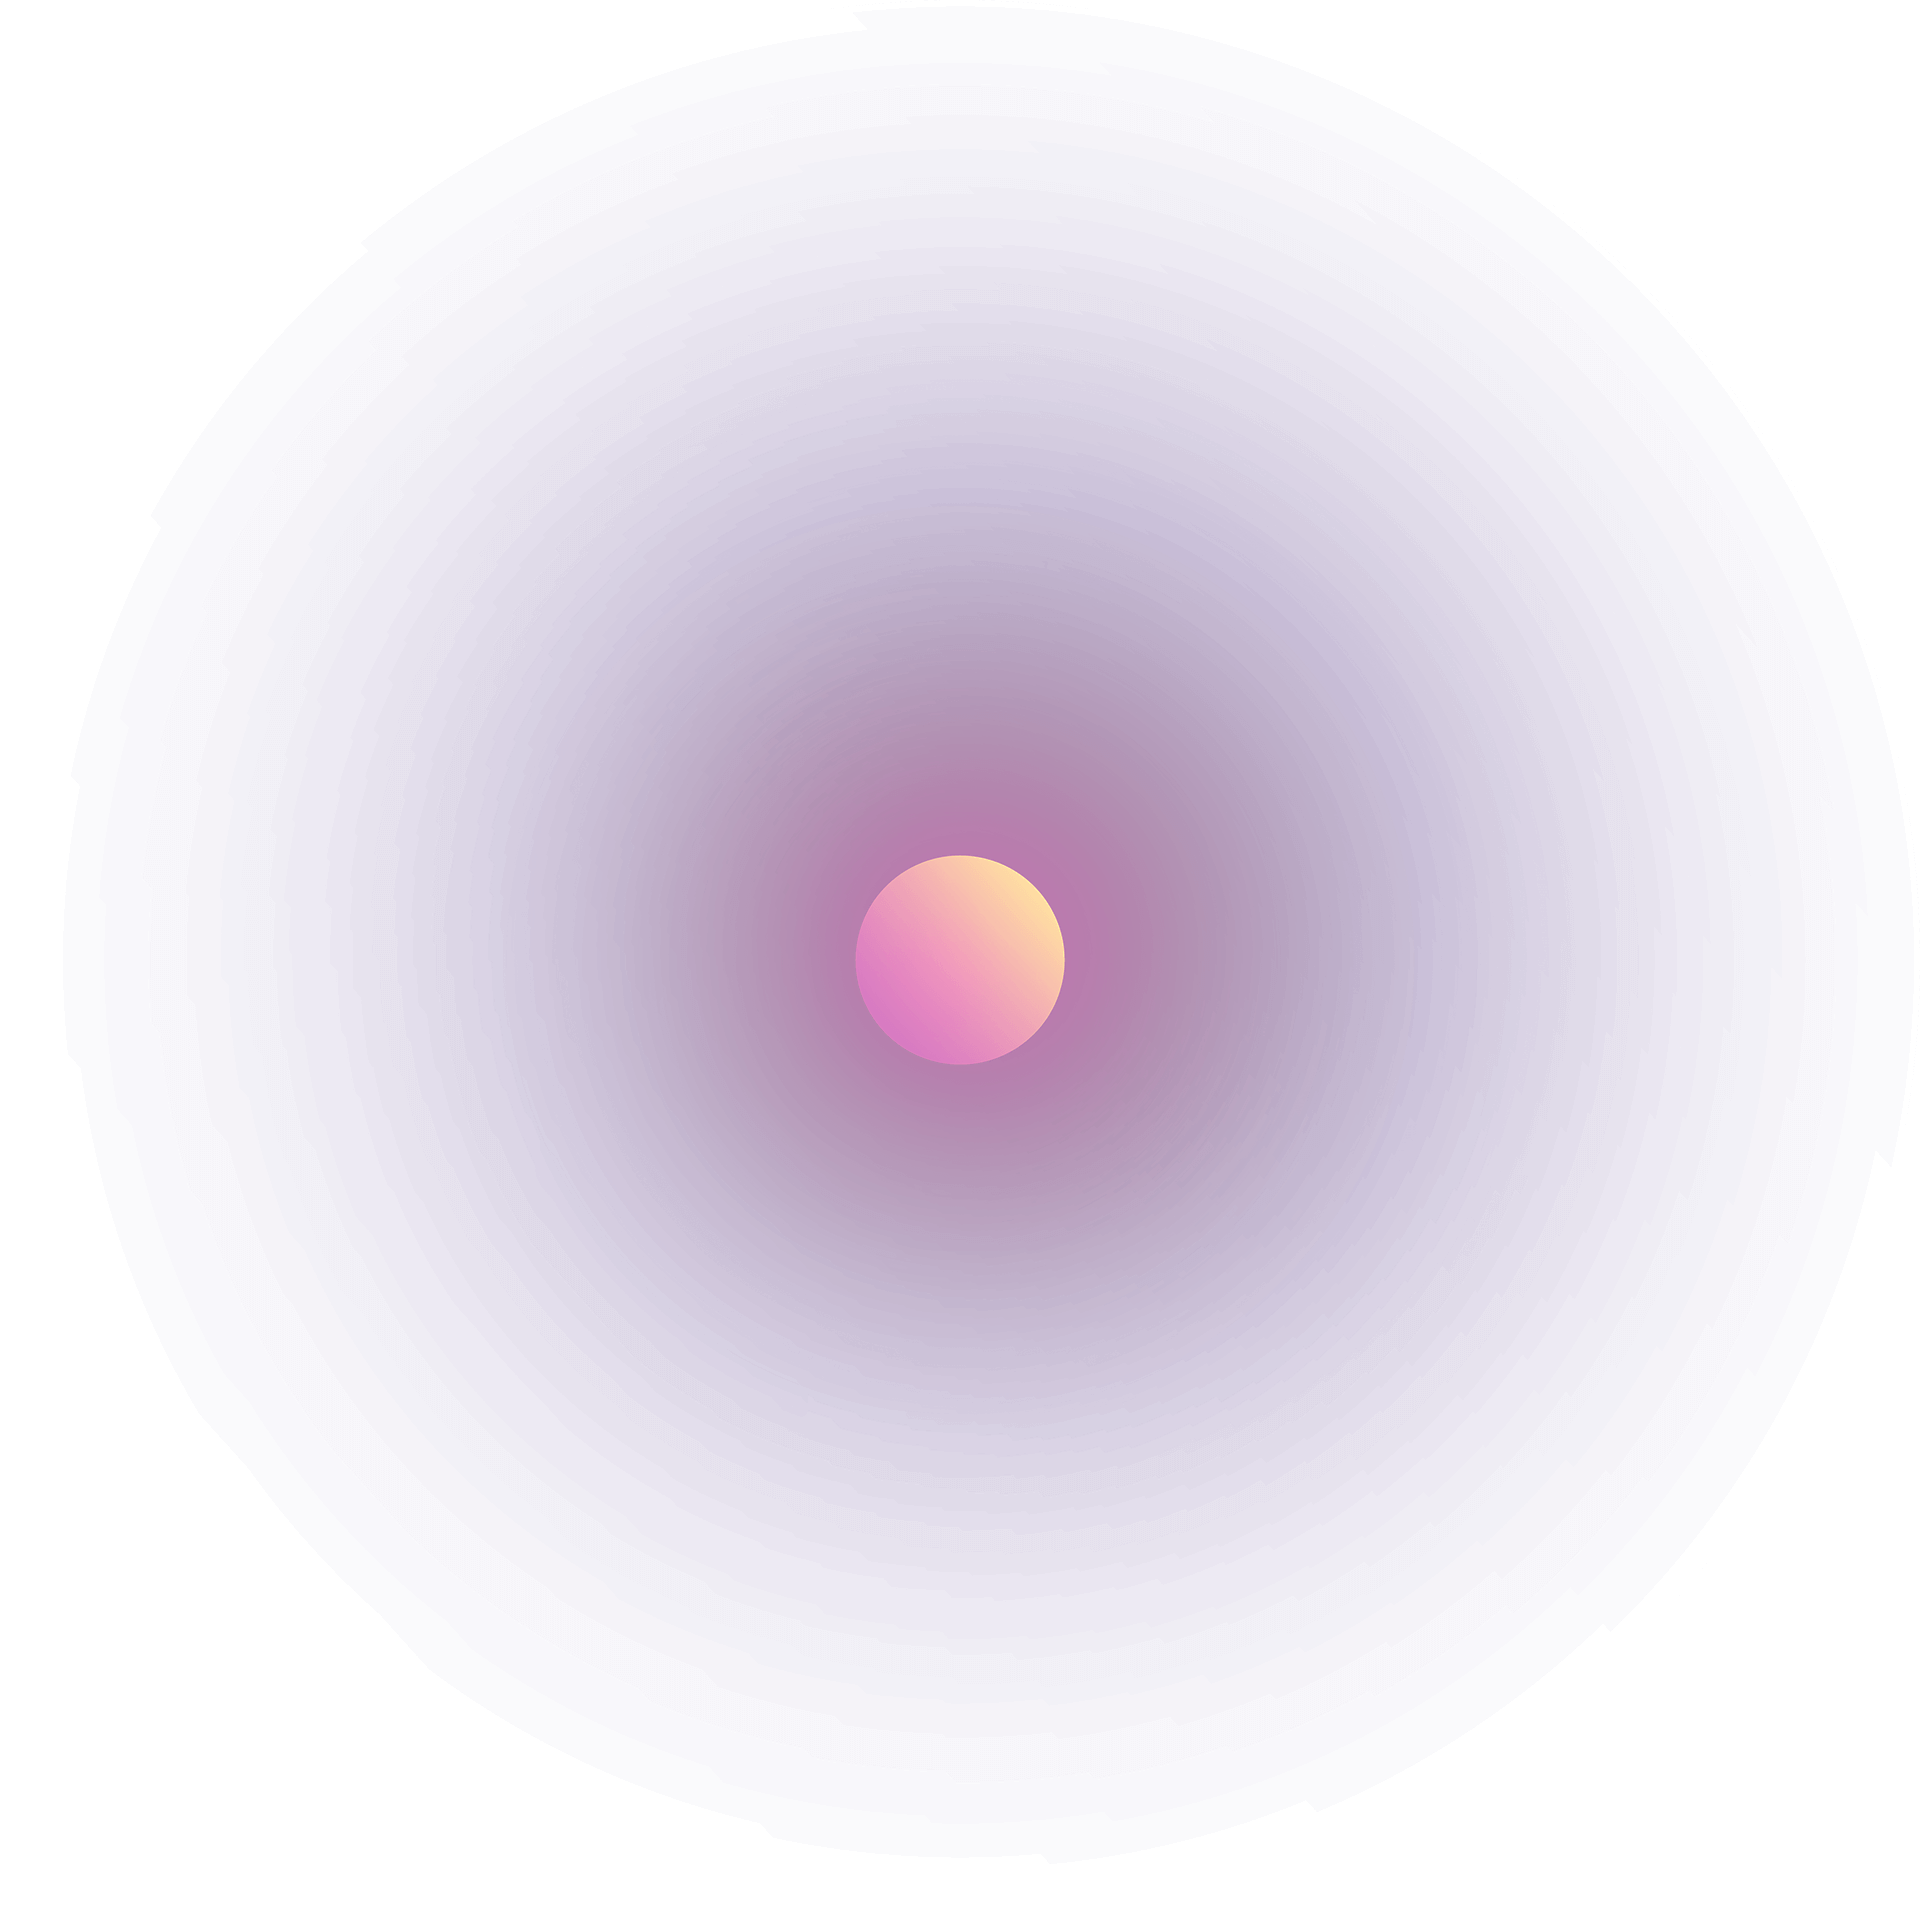 Illustration of a moon with a glowing center and purple gradient